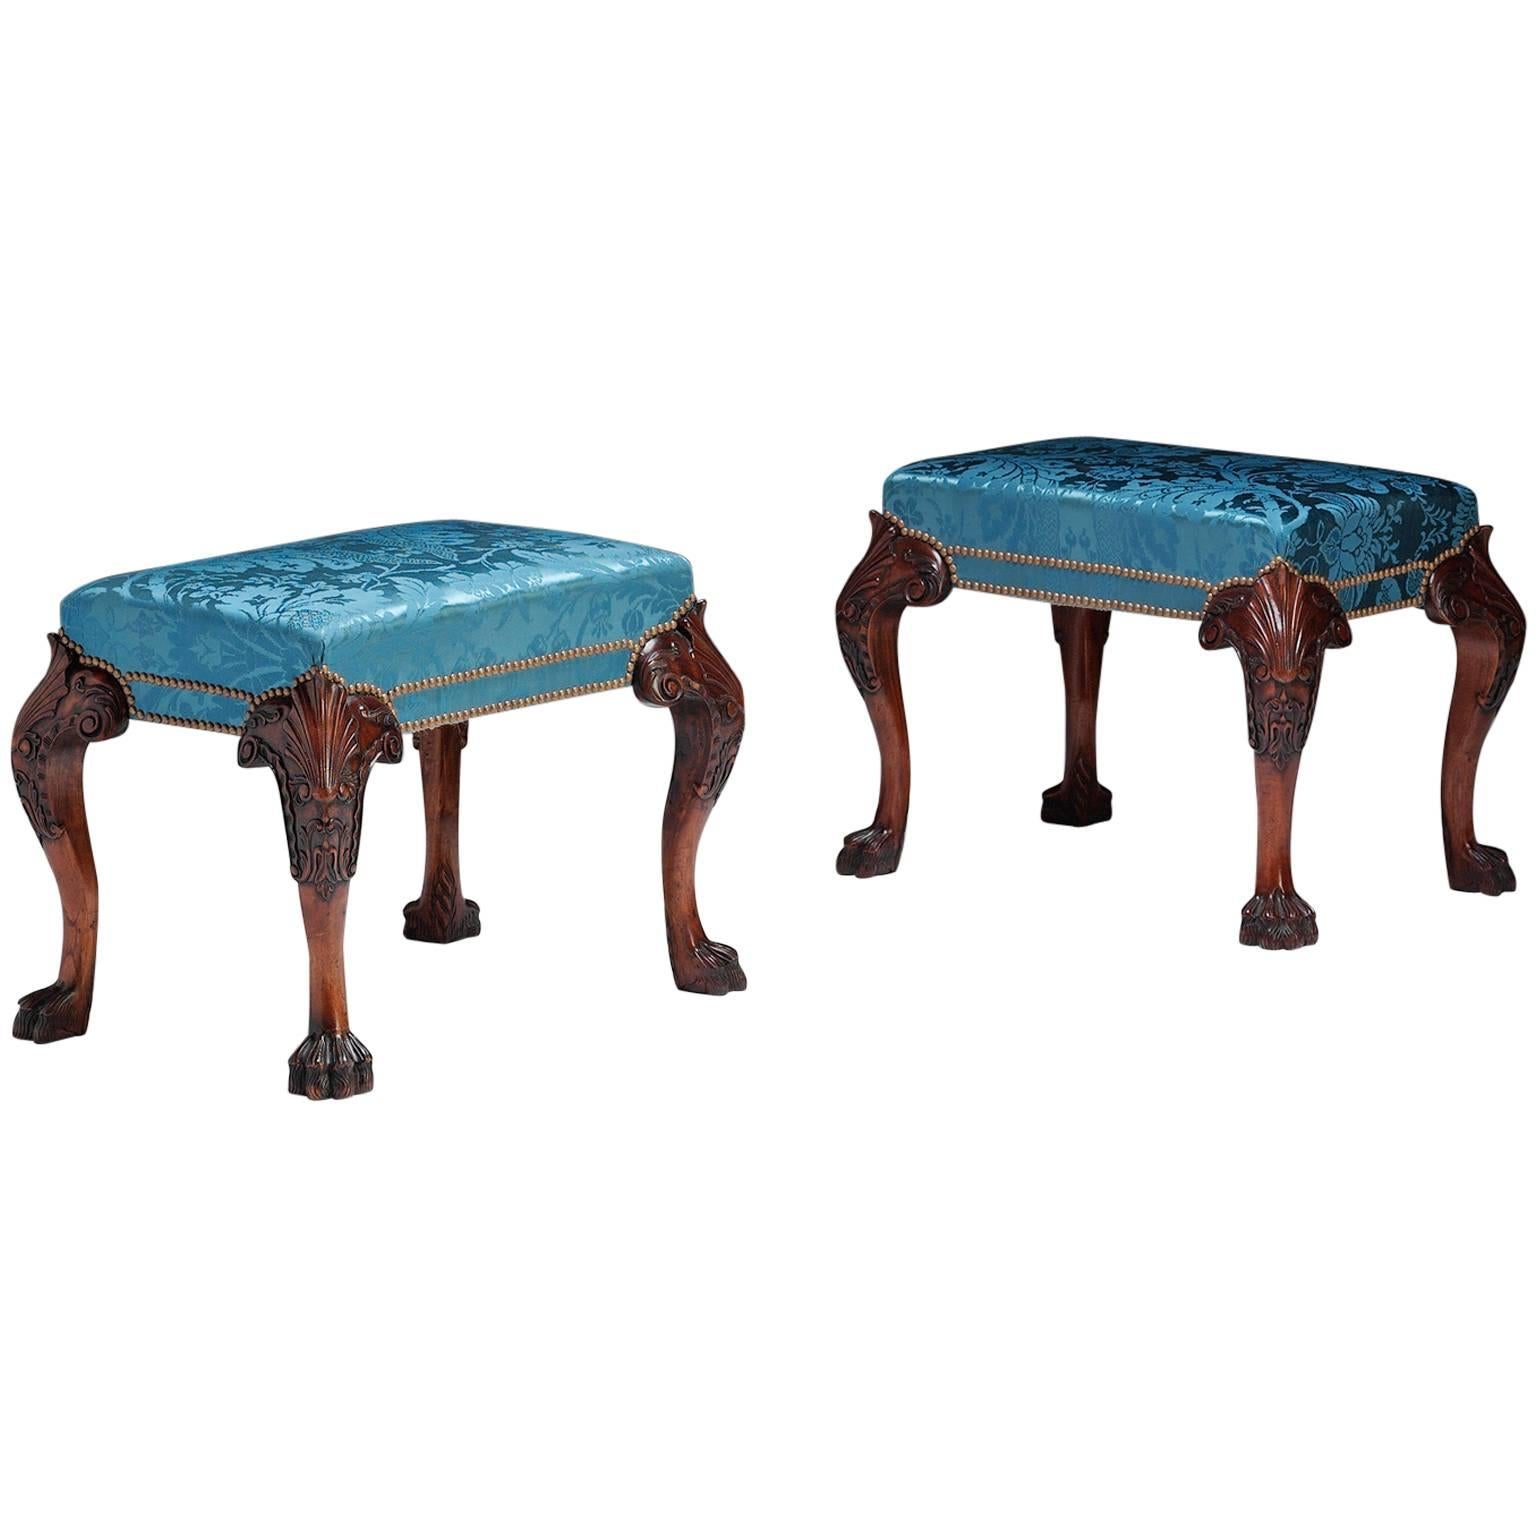 Pair of Claw Foot Stools in the style of Thomas Chippendale For Sale